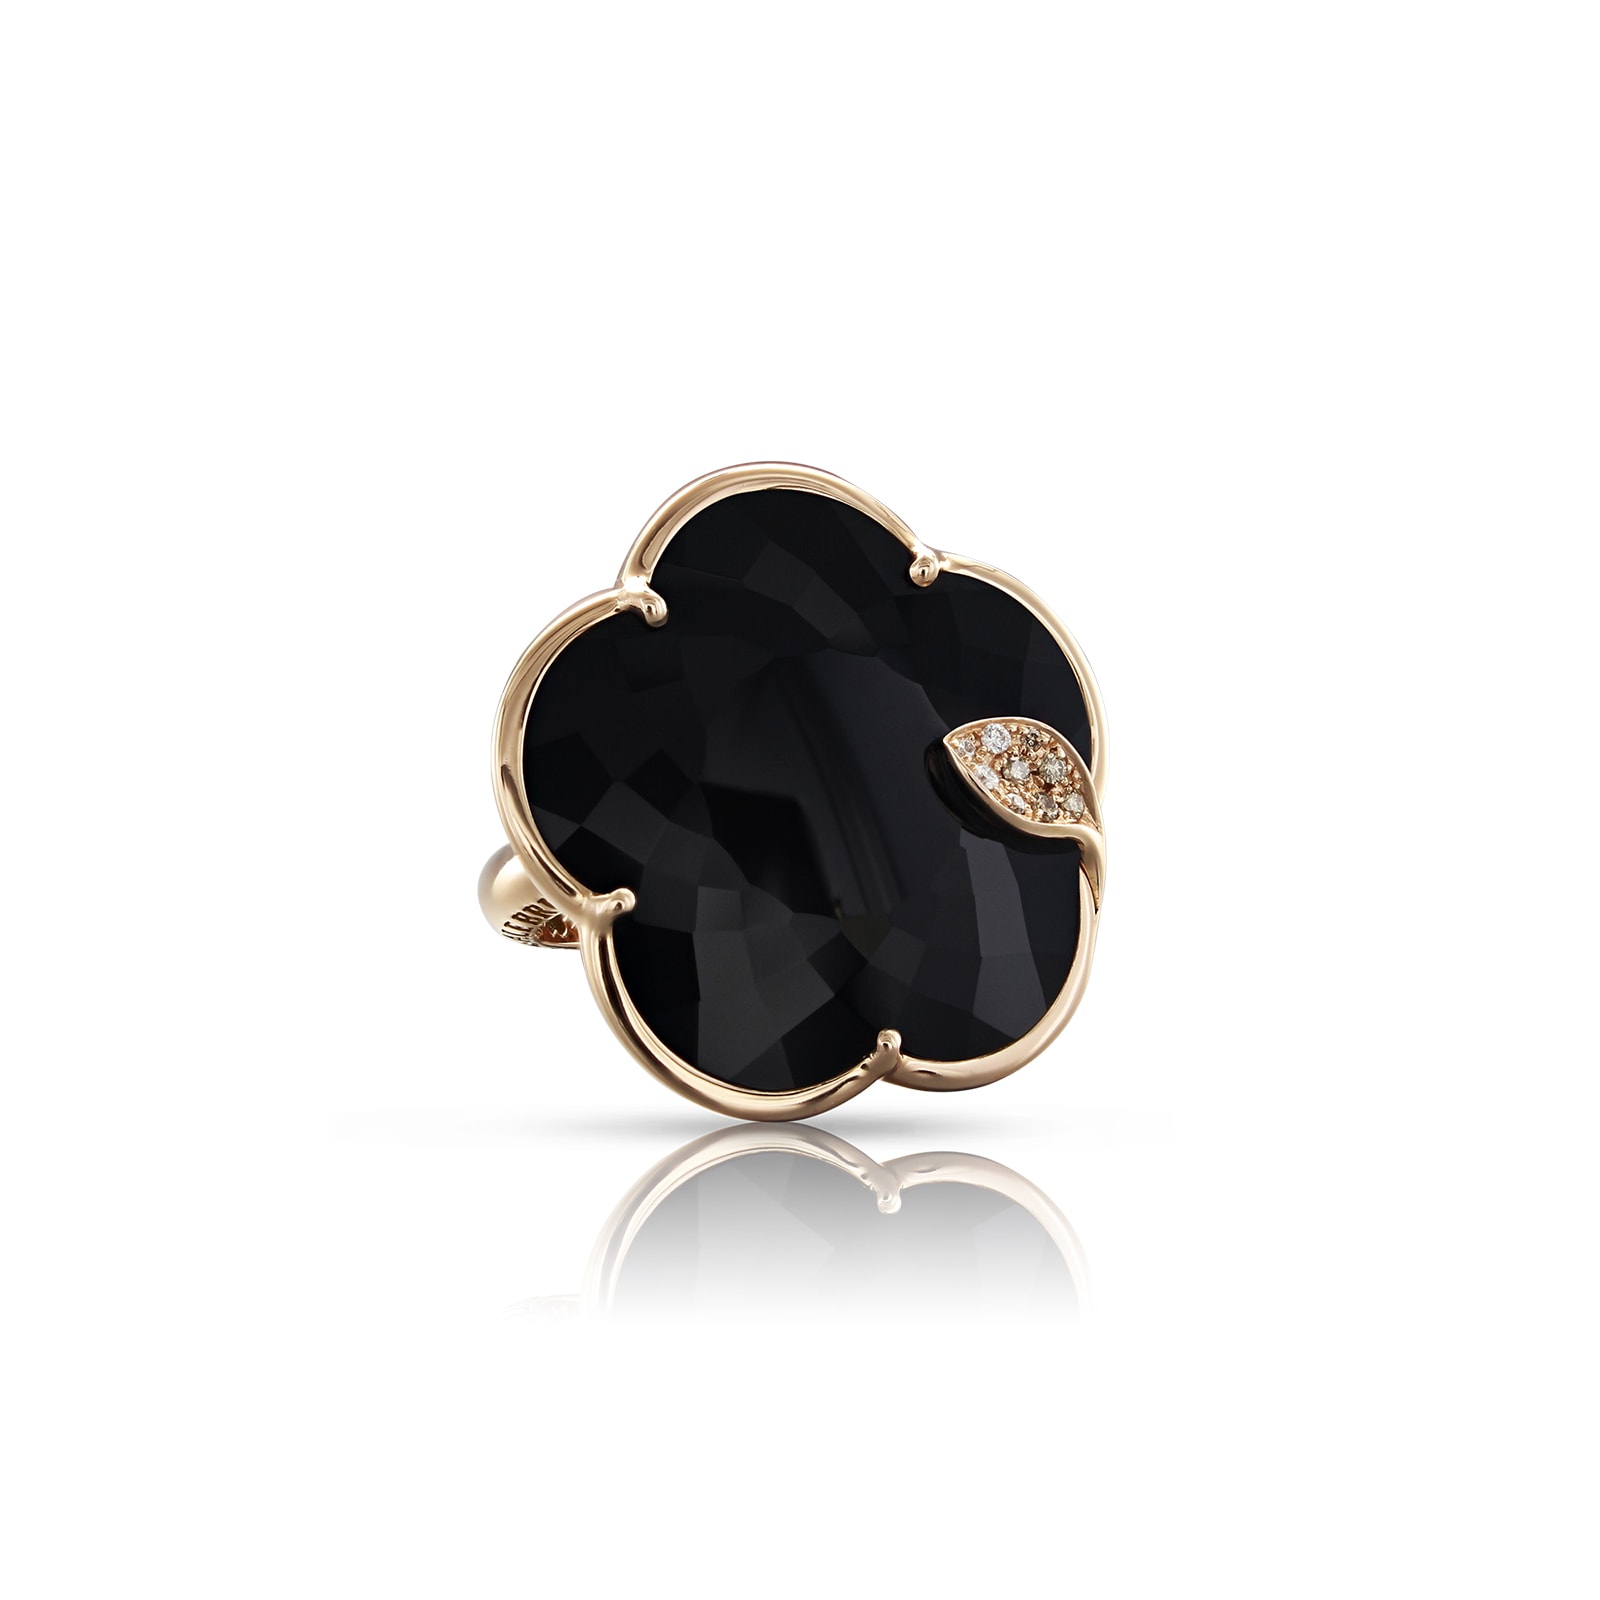 Ton Joli Ring in 18ct Rose Gold with Onyx, White and Champagne Diamonds - Ring Size M